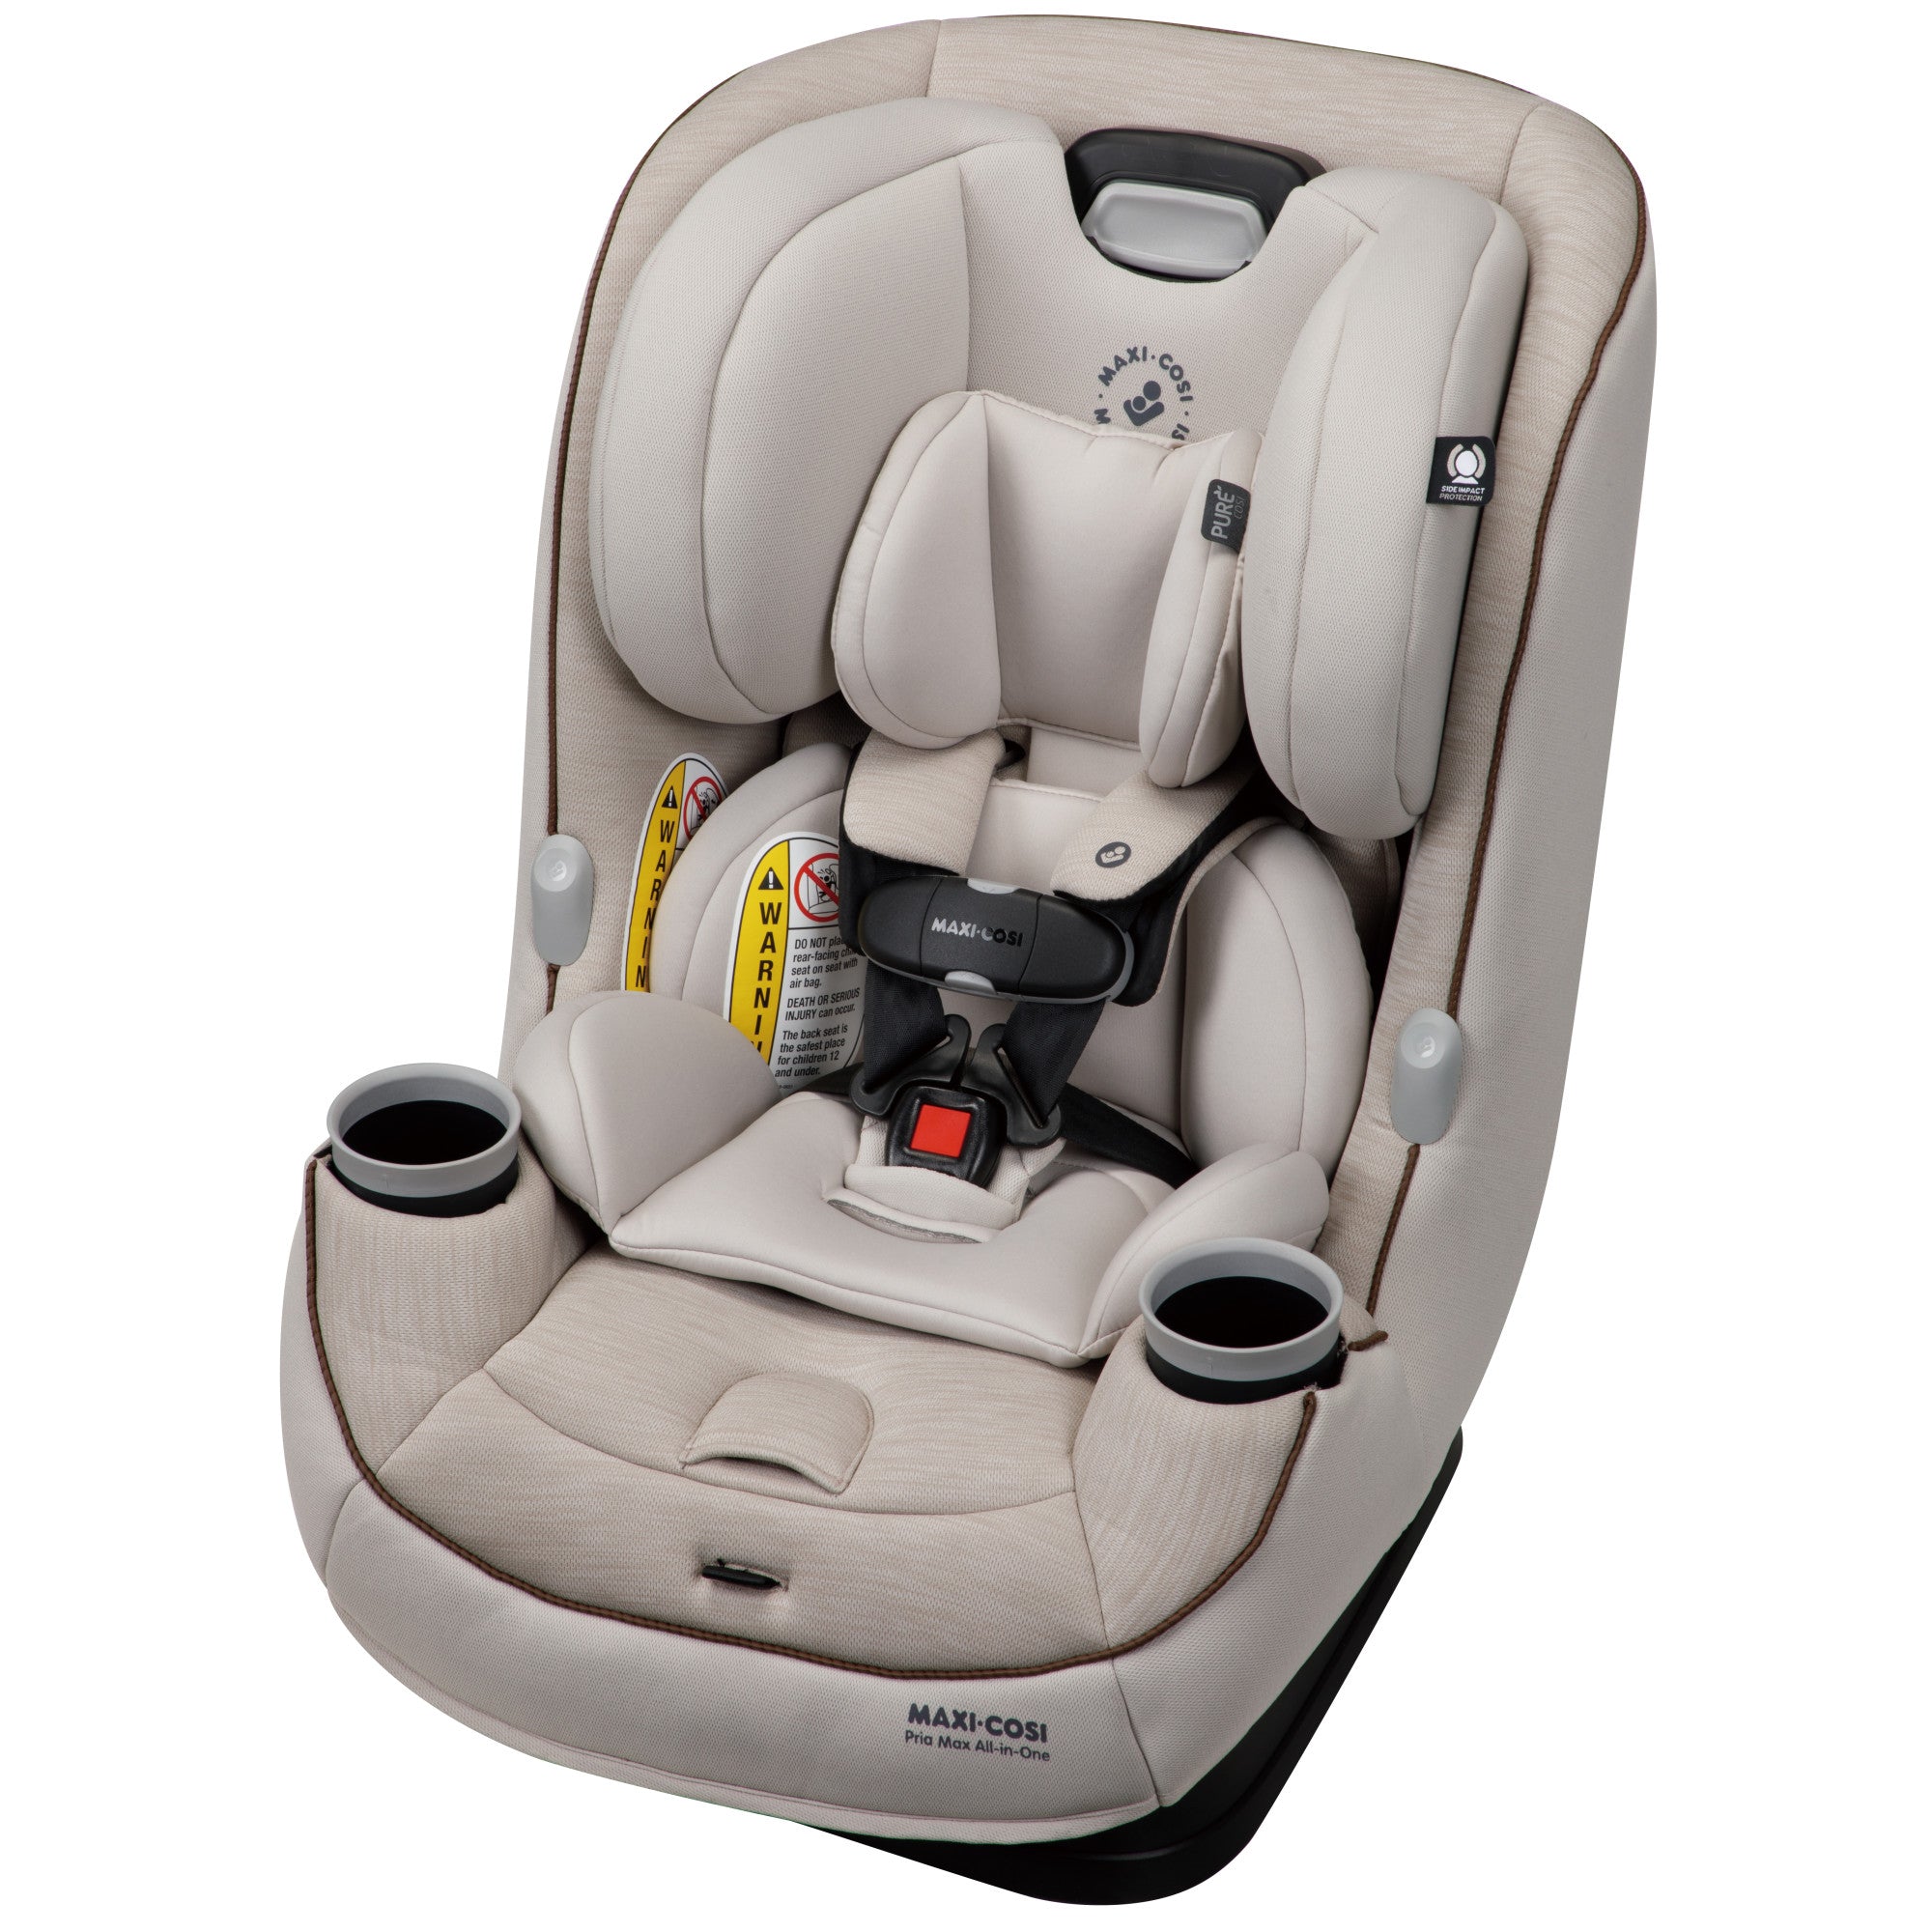 Pria™ Max All-in-One Convertible Car Seat - Desert Wonder - 45 degree angle view of left side